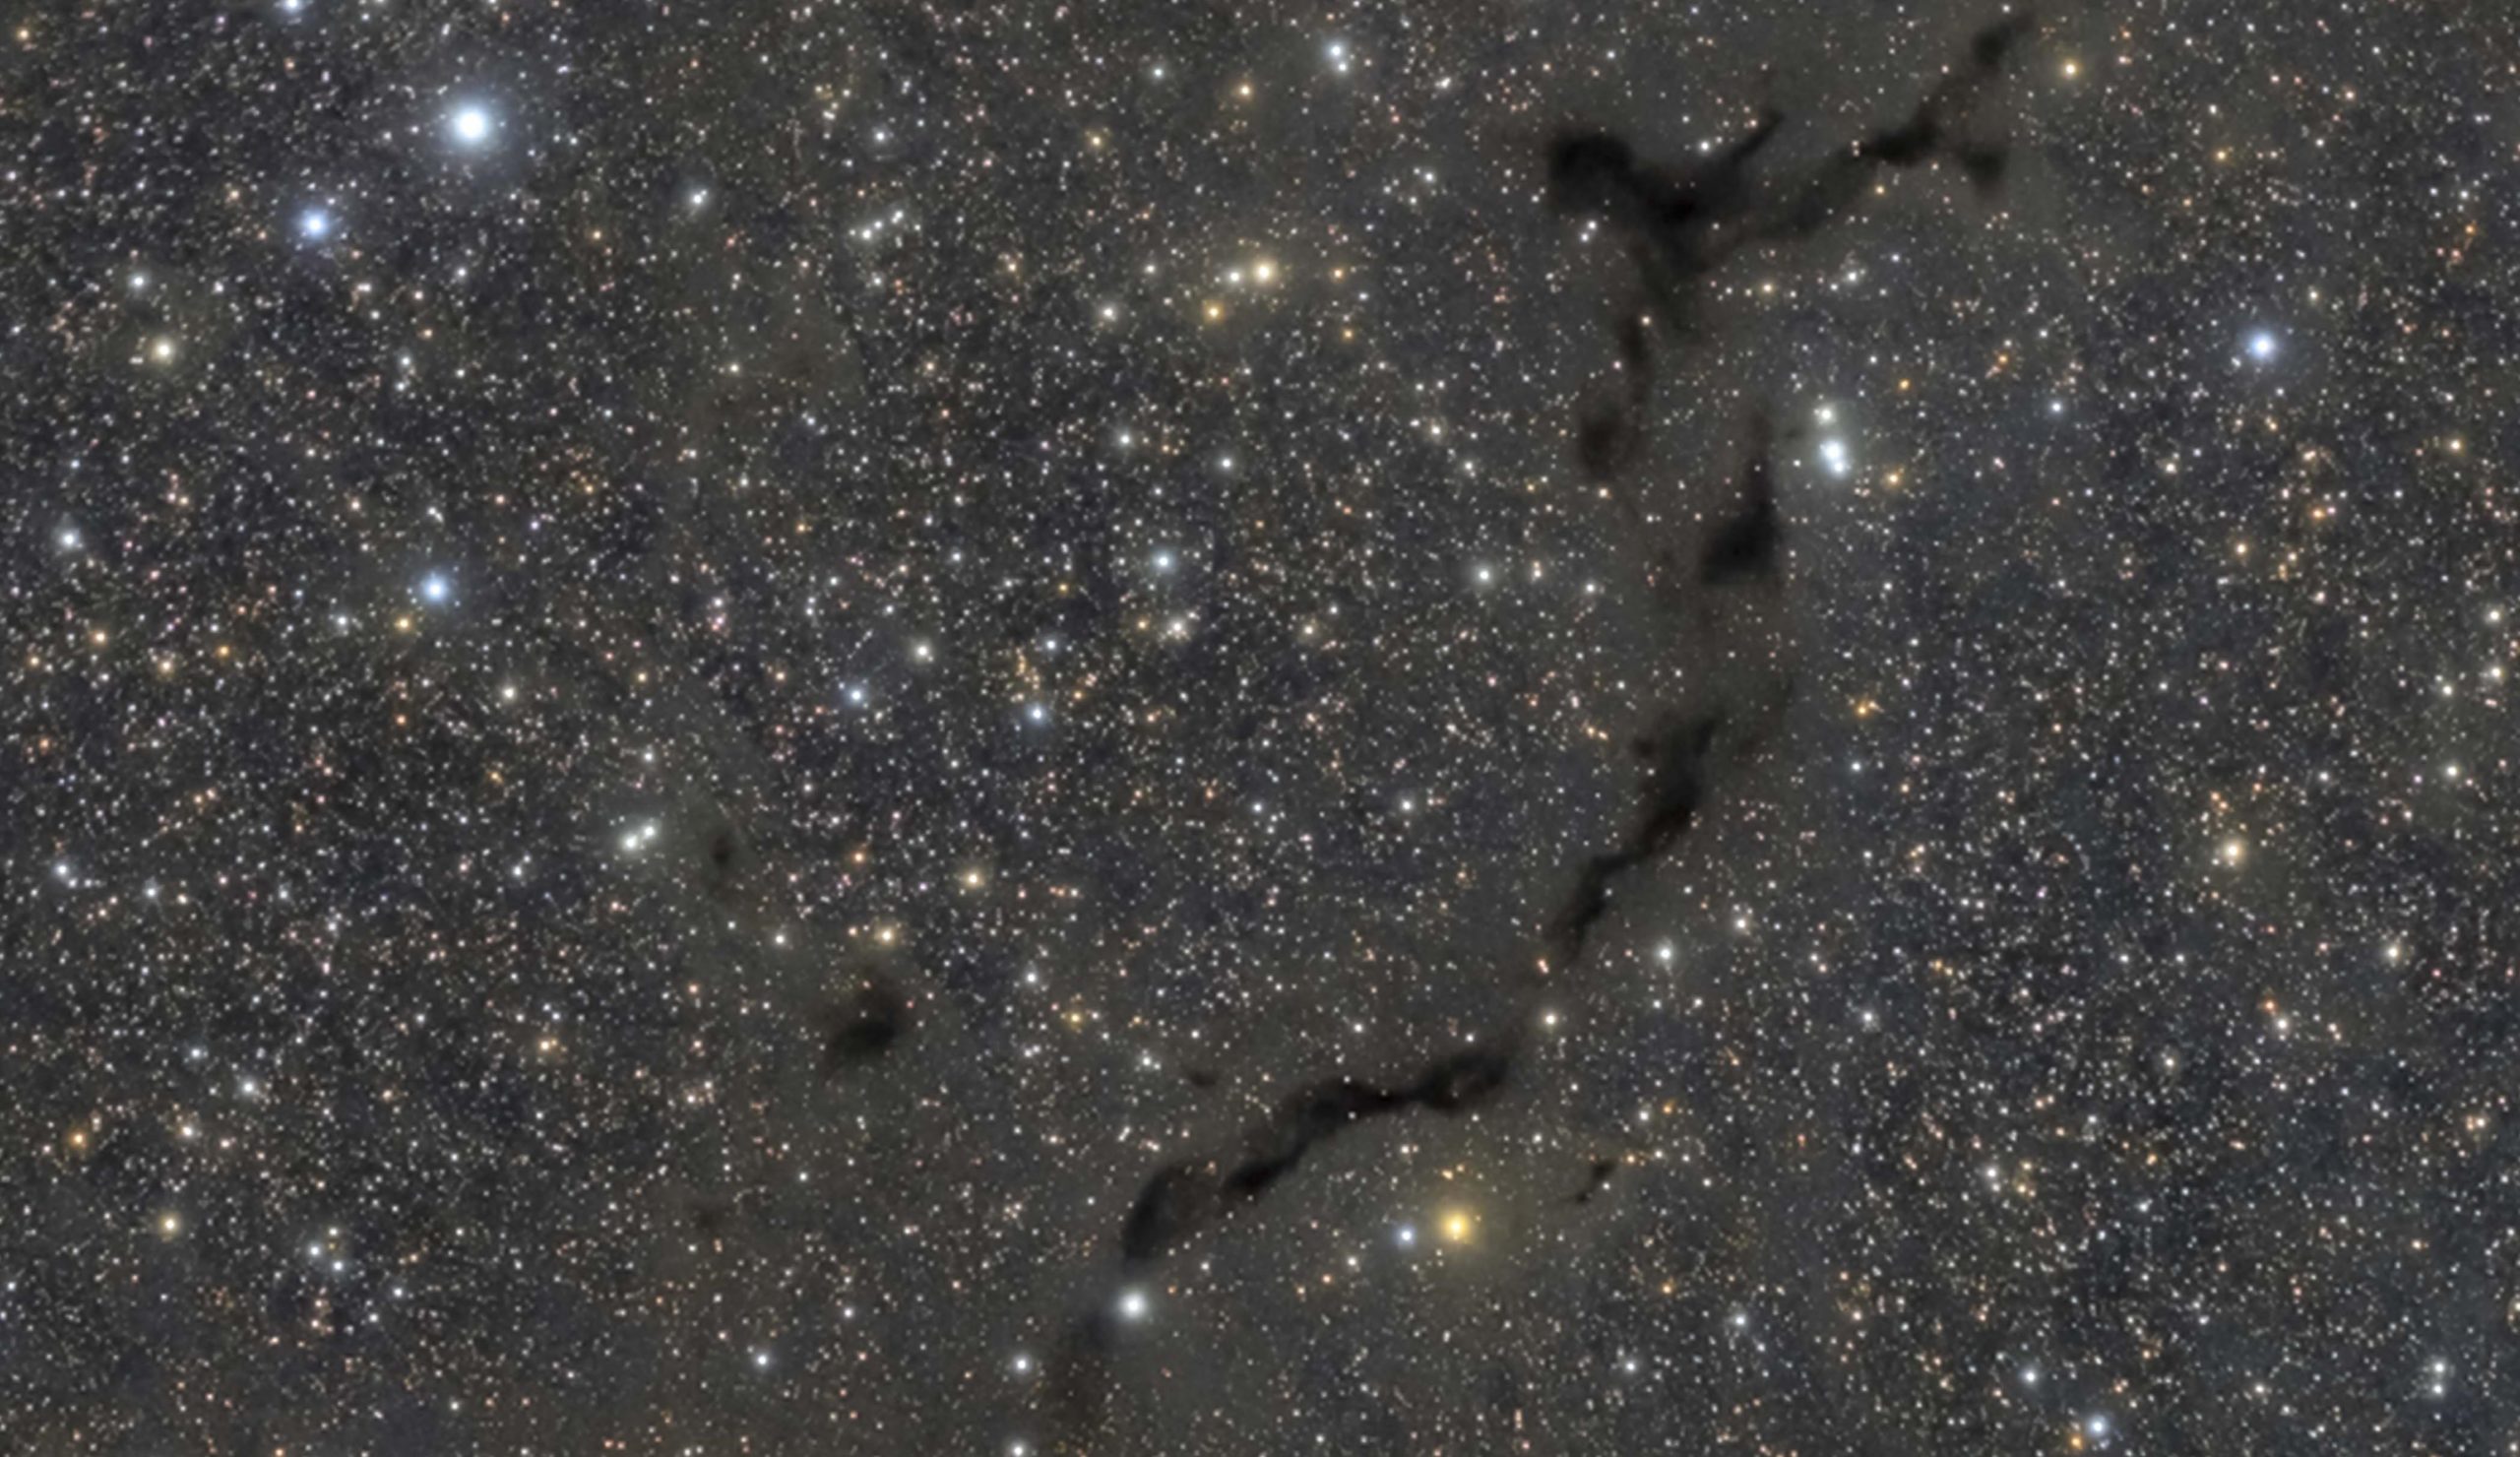 Barnard-150-NGC6946-The-sea-horse-and-the-galaxy-feature